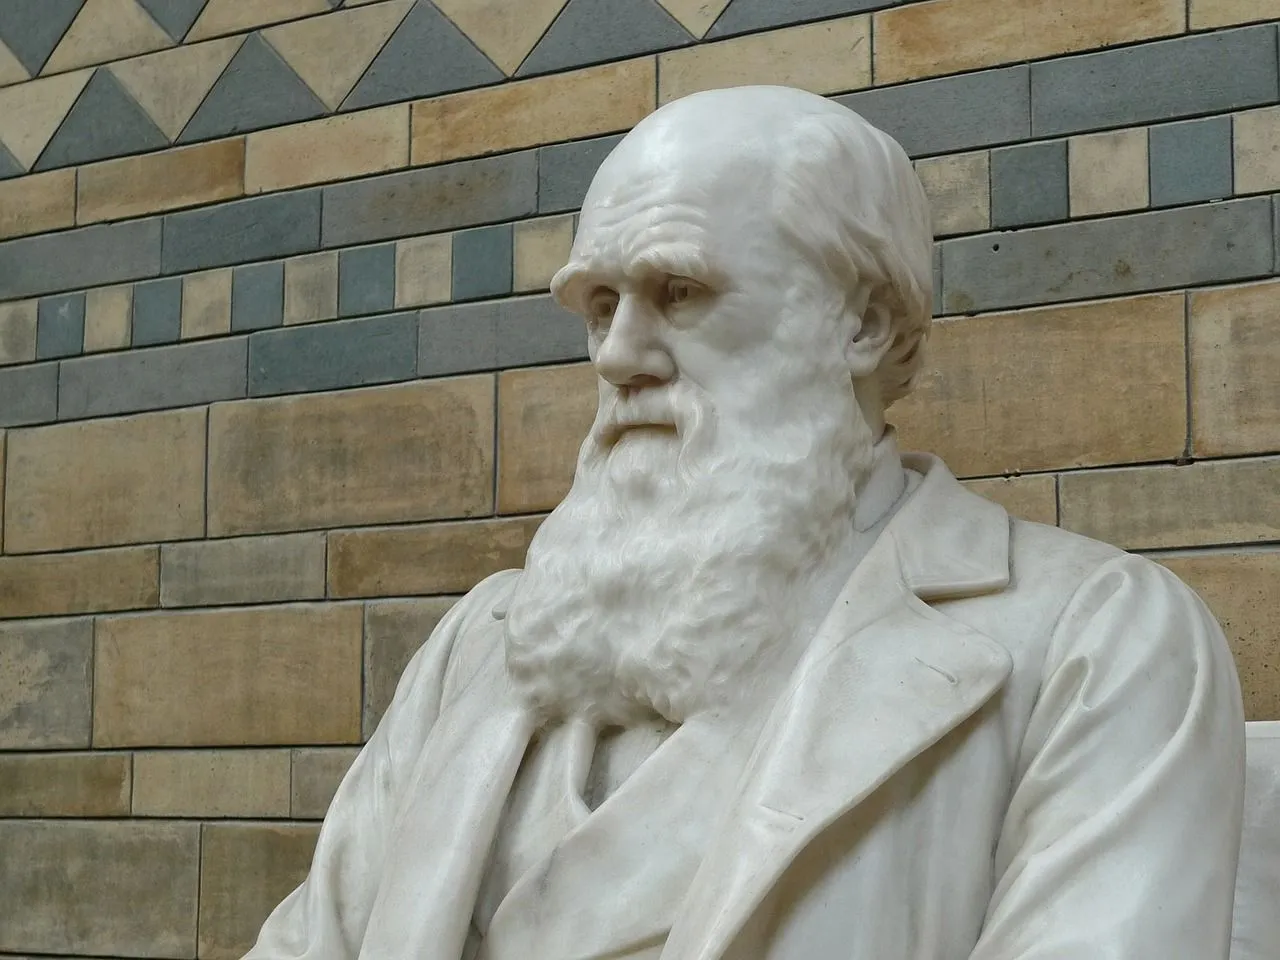 Today, there have been more than 250 species and many higher groups who have Darwin’s name.